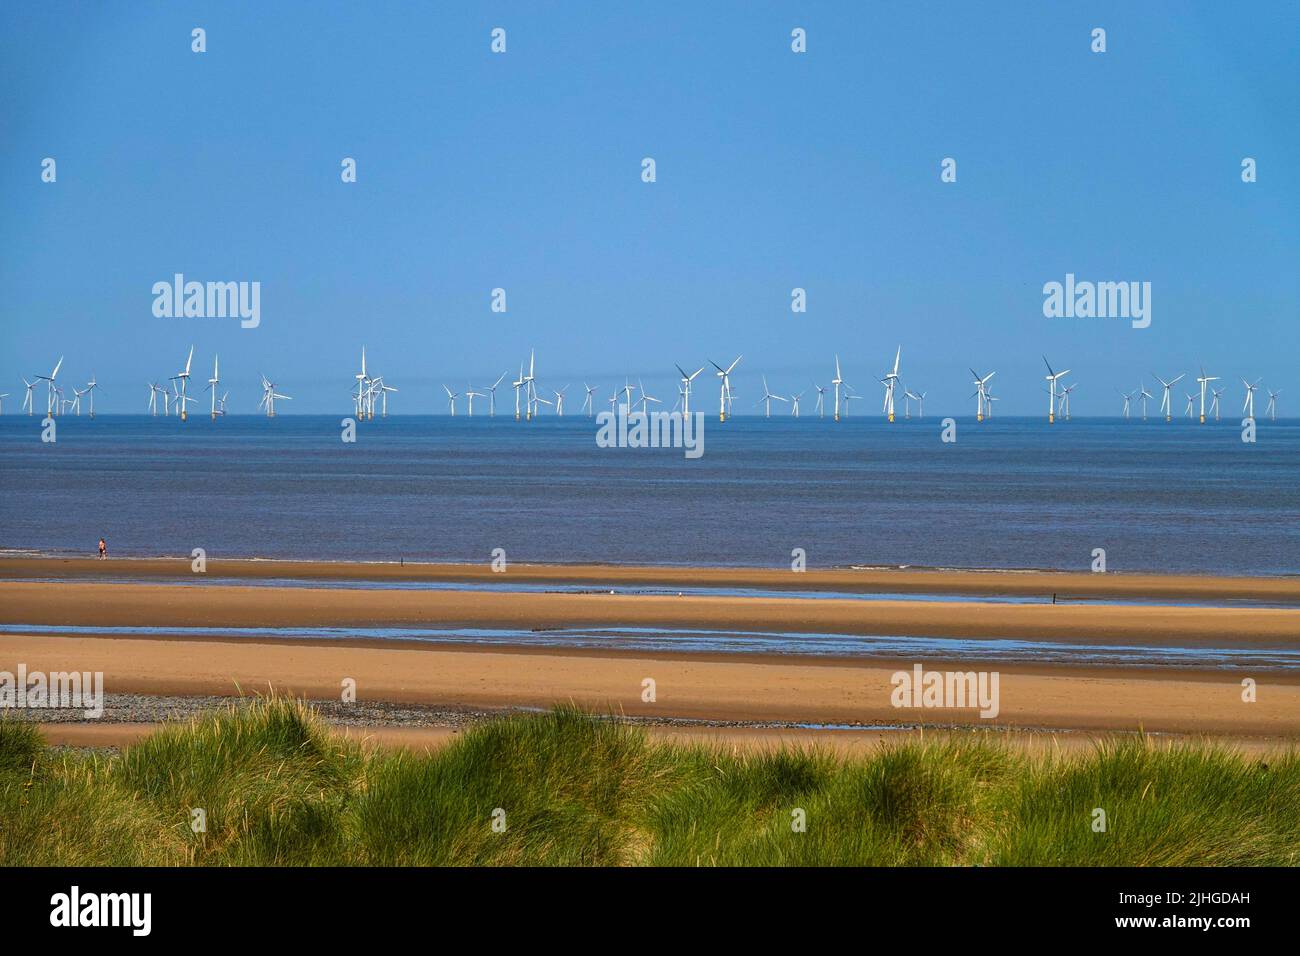 Hottest day ever in the UK at Talacre Beach, and the Point of Ayr lighthouse, Flintshire, North Wales, with Burbo Bank Offshore Wind Farm Stock Photo